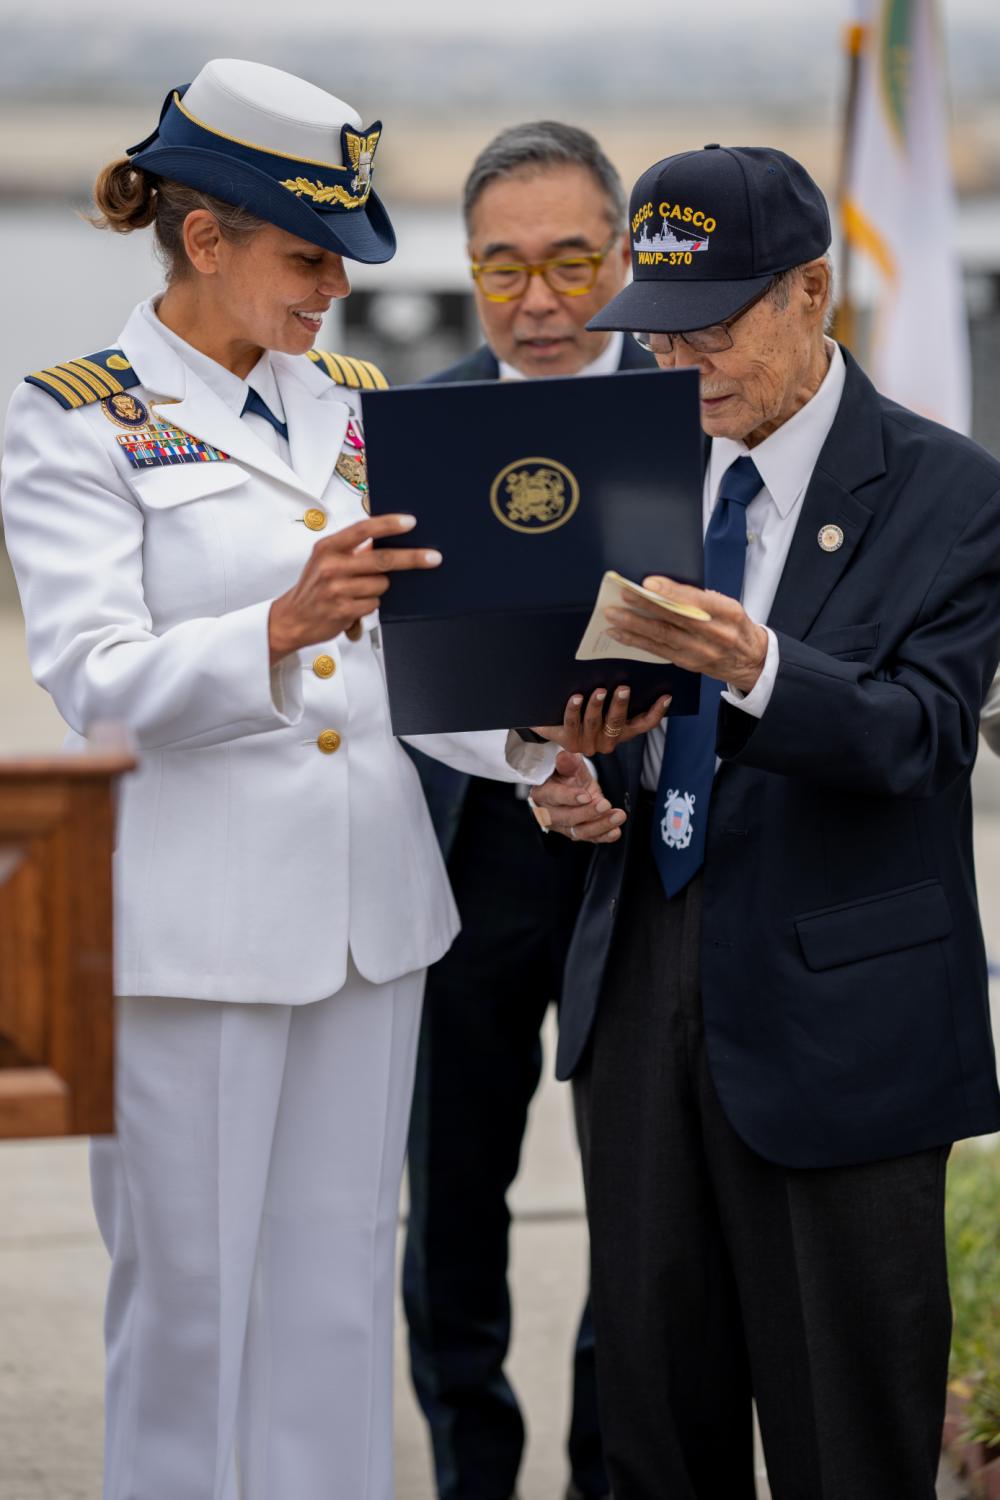 Captain Rebecca Ore, commanding officer Sector Los Angeles-Long Beach presents Rikio Izumi, Coast Guard veteran with the National Defense Service Medal for his service during the Korean War, San Pedro, California, June 10, 2022. Mr. Izumi, born in Hawaii in 1930 served in the Coast Guard from 1951 to 1953. (U.S. Coast Guard photo by Petty Officer 3rd Class Aidan Cooney)